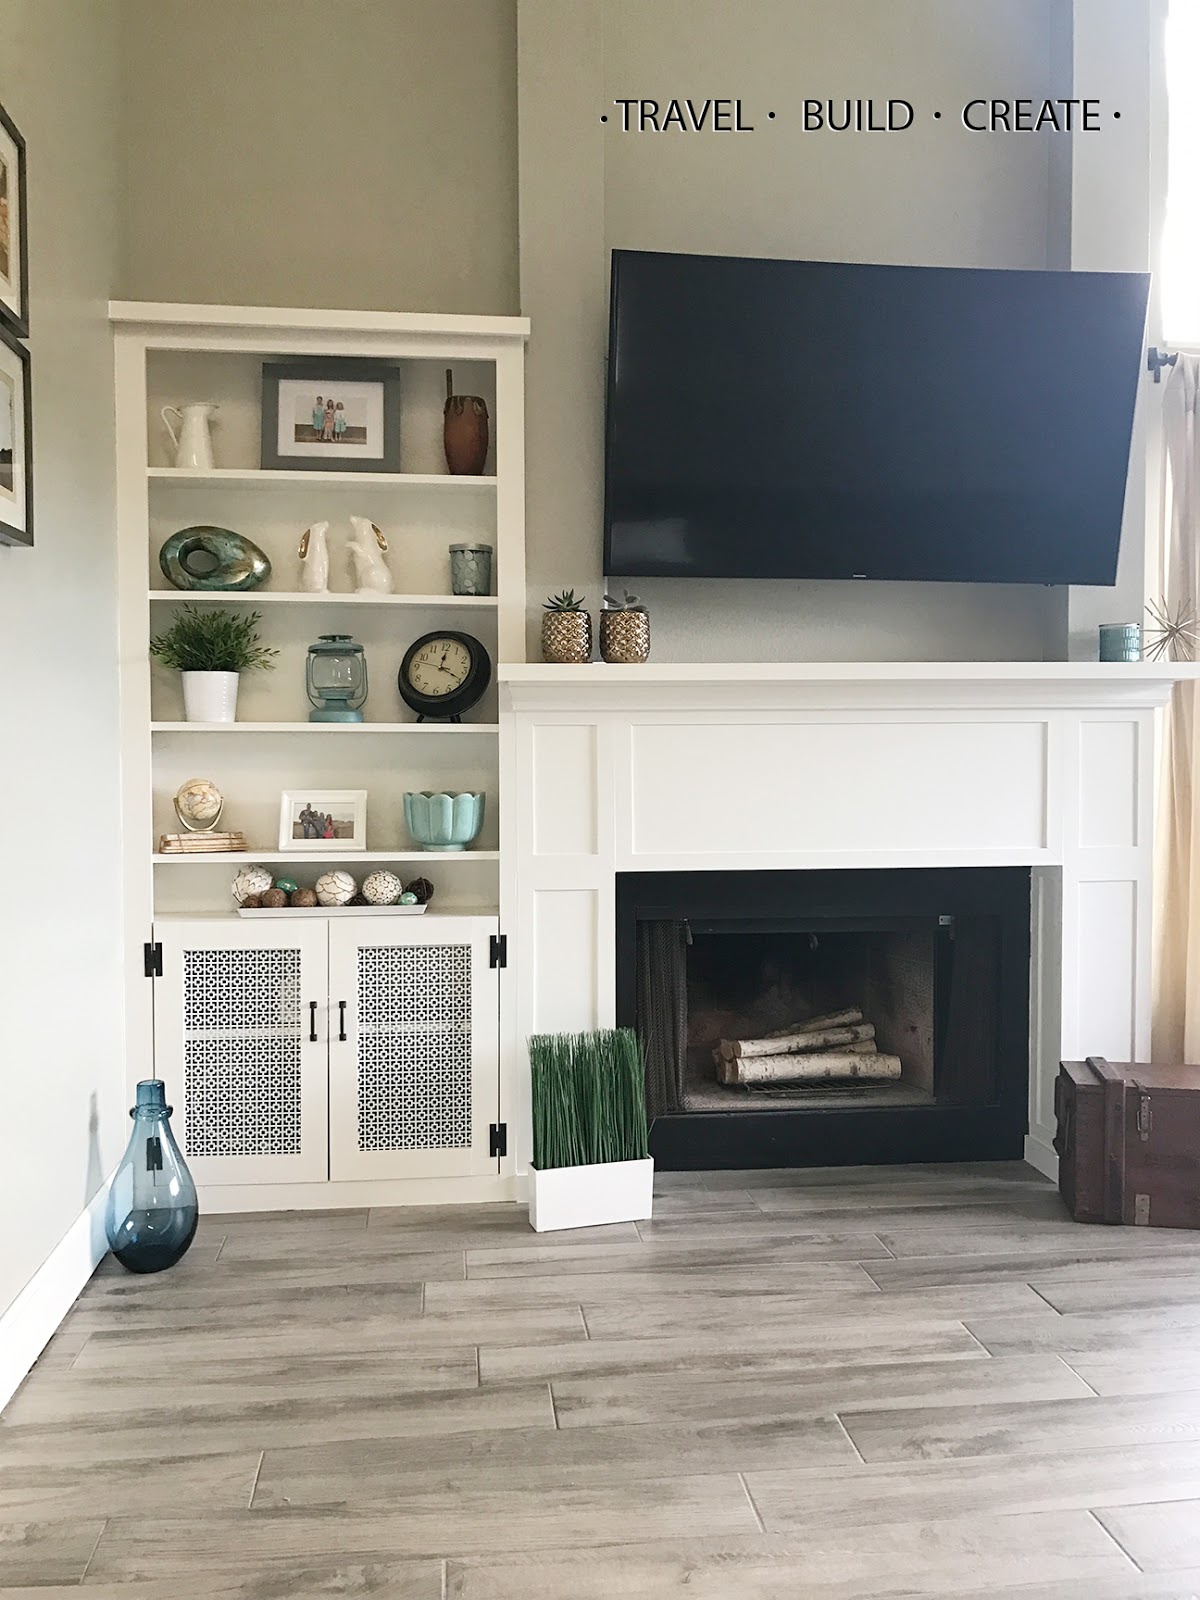 Diy Fireplace Surround And Built In, How To Build Bookcases Around A Fireplace